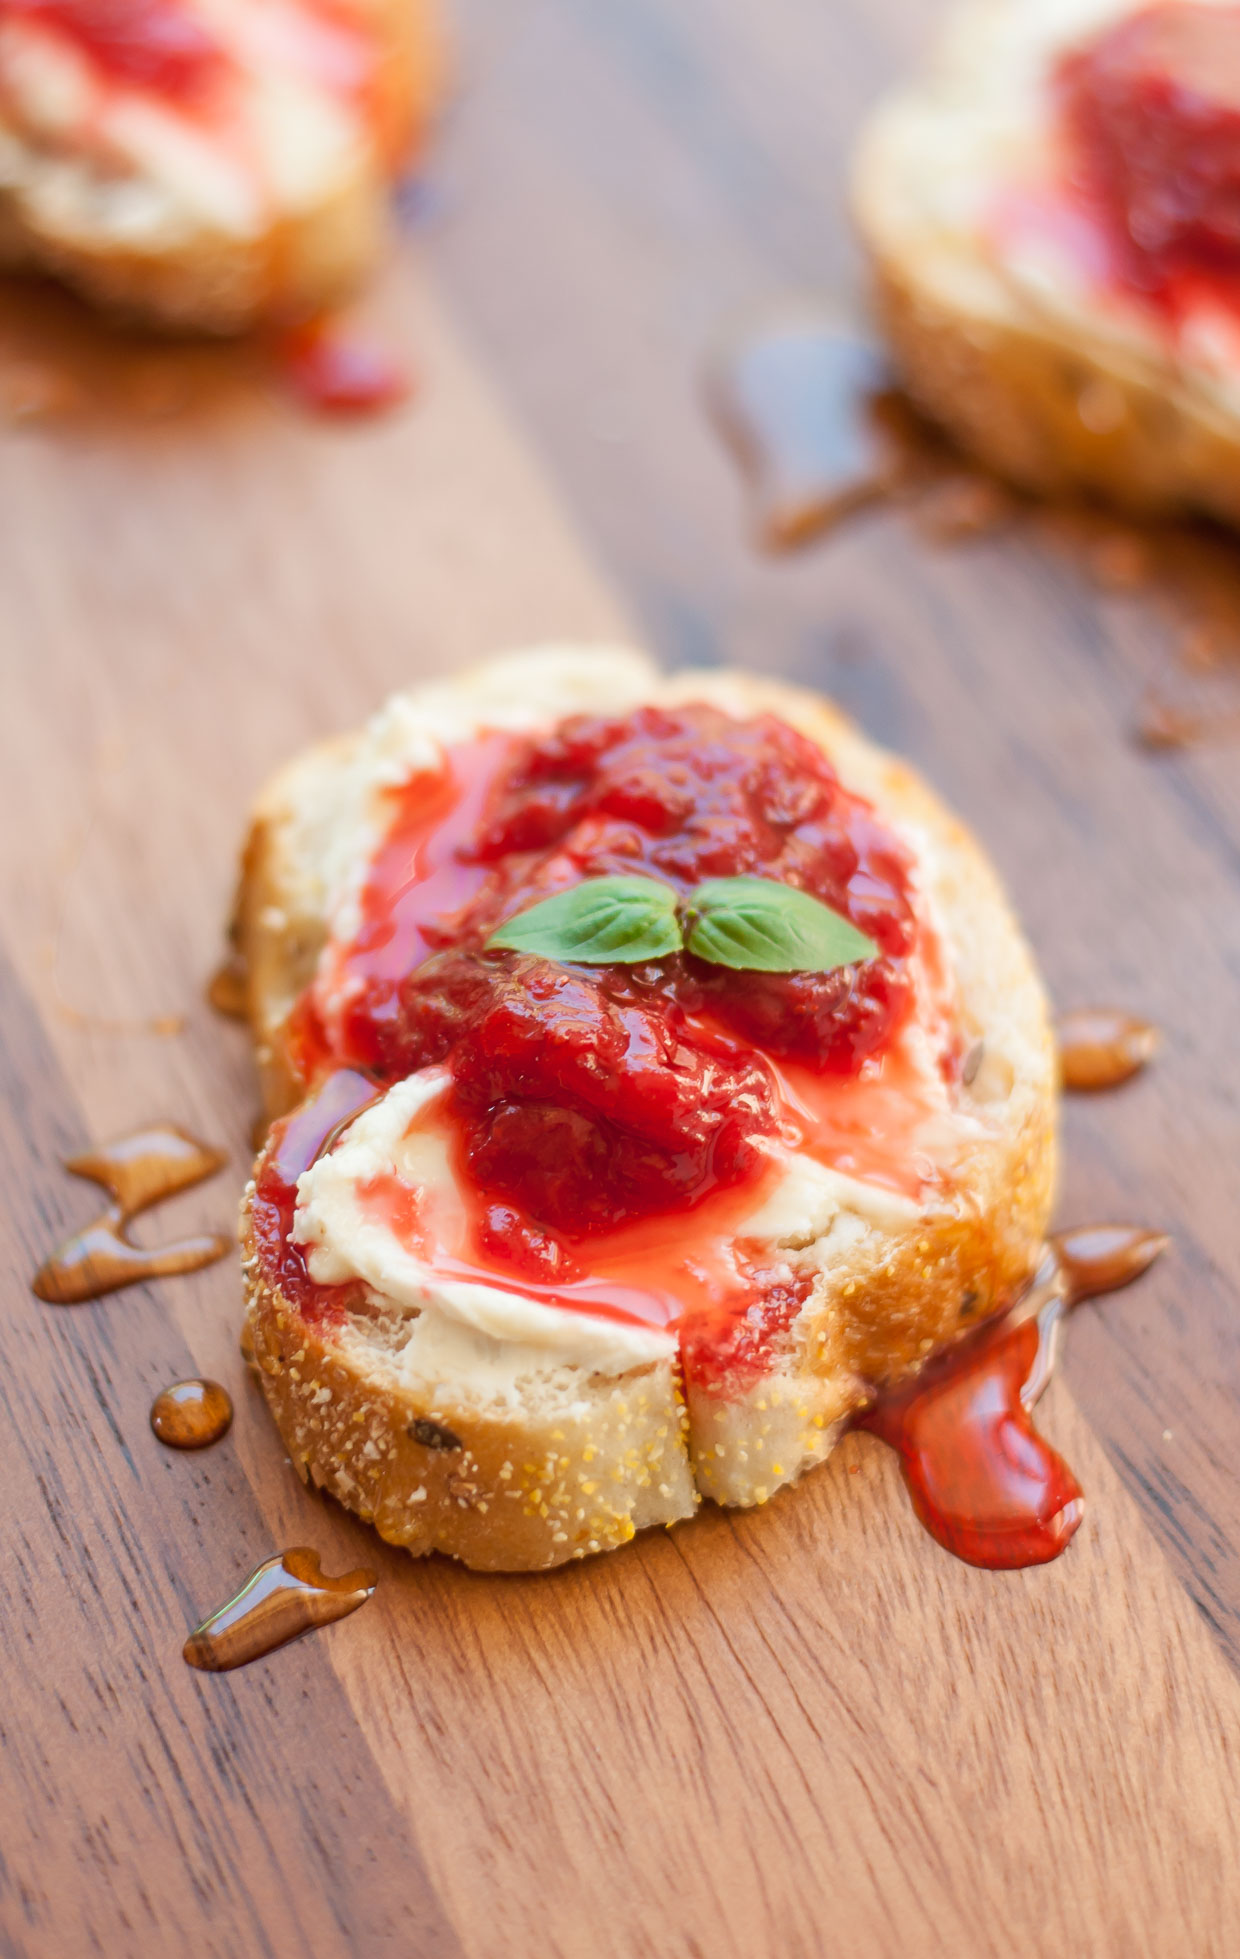 Whipped Honey Goat Cheese Crostini with Simple Strawberry Sauce :: This speedy crostini is ready to take your brunch game to the next level!